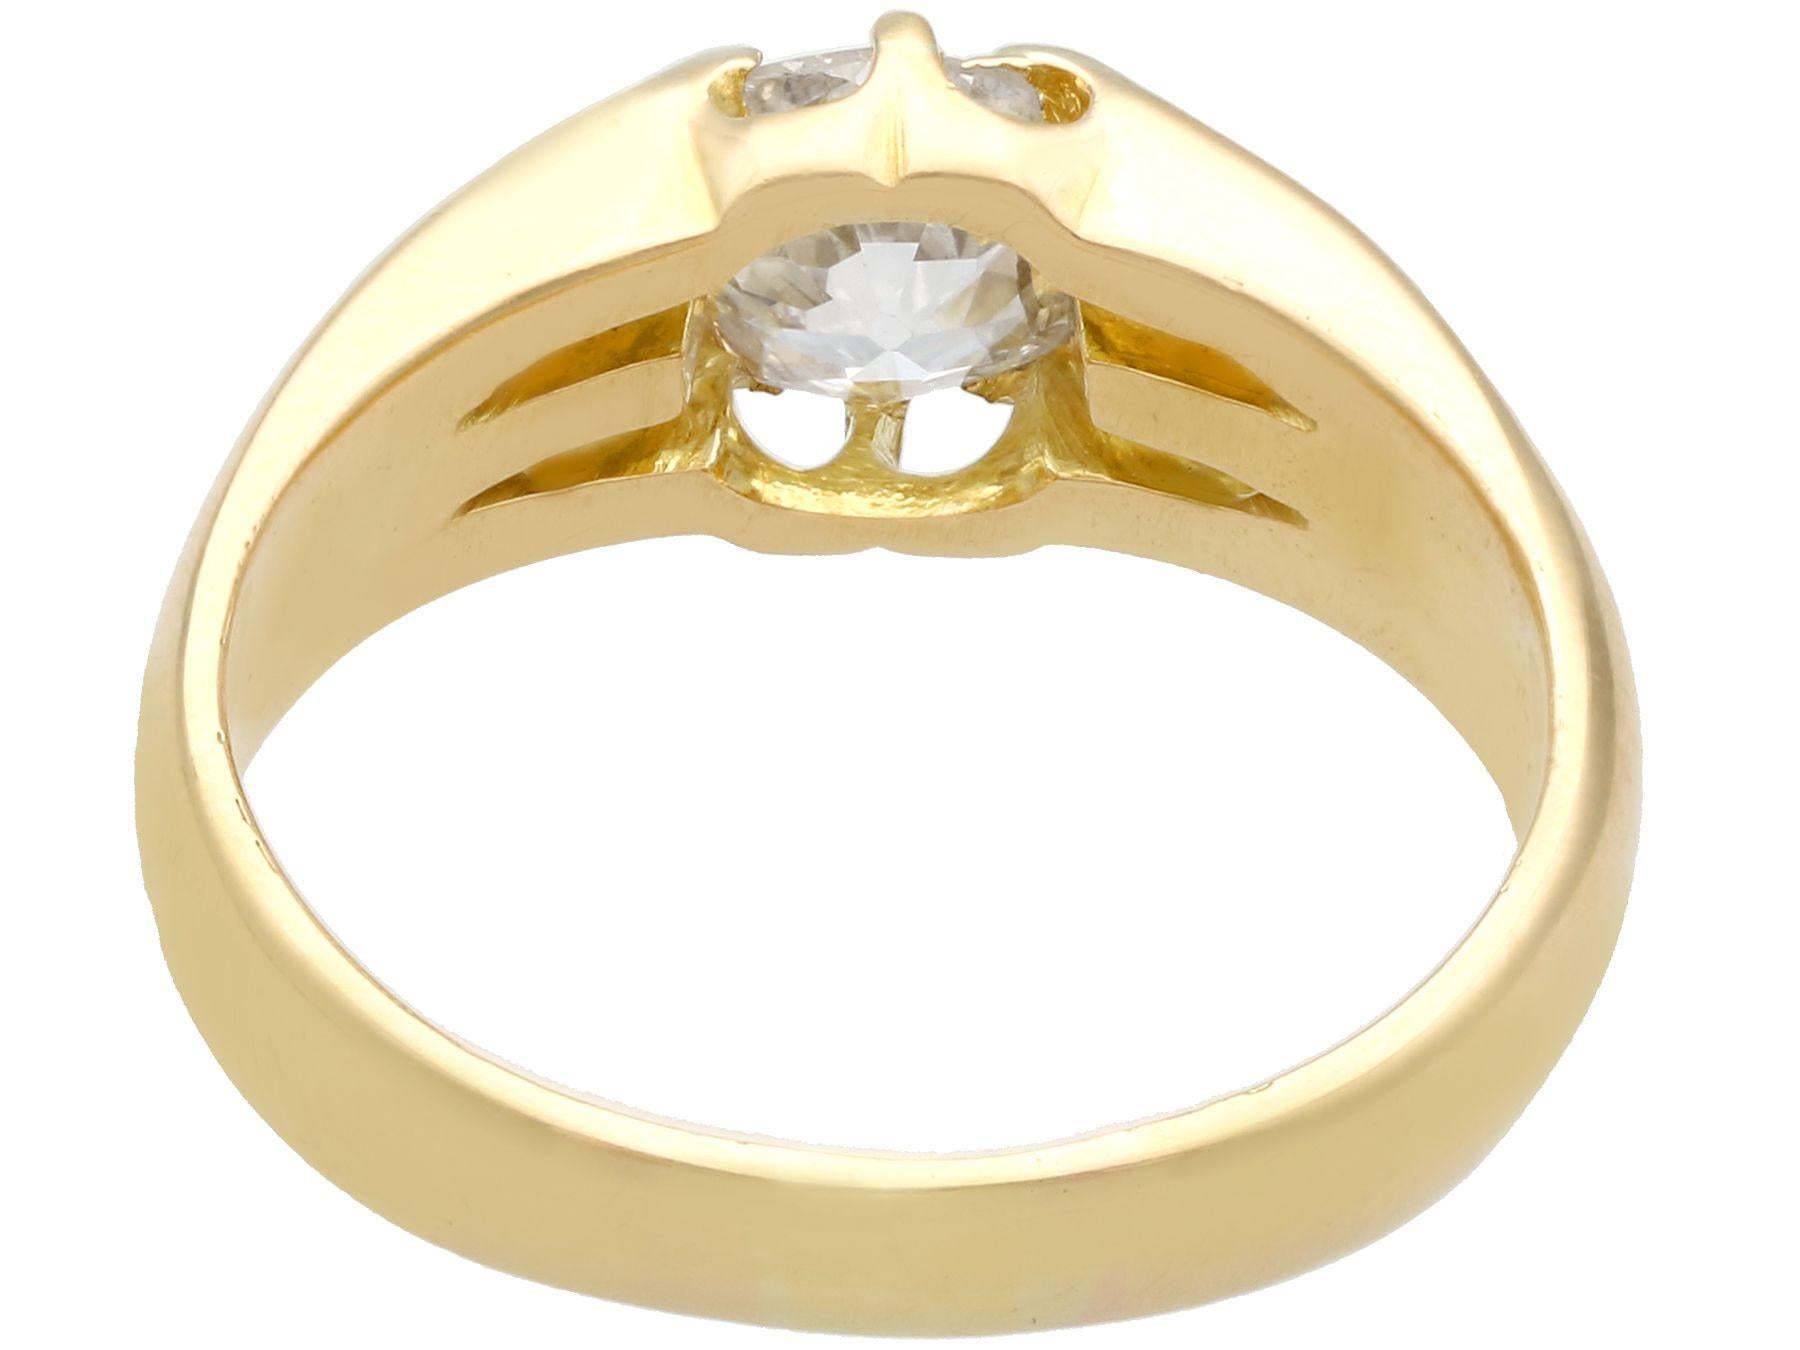 Women's or Men's 1900s Antique 1.21 Carat Diamond and Yellow Gold Solitaire Engagement Ring